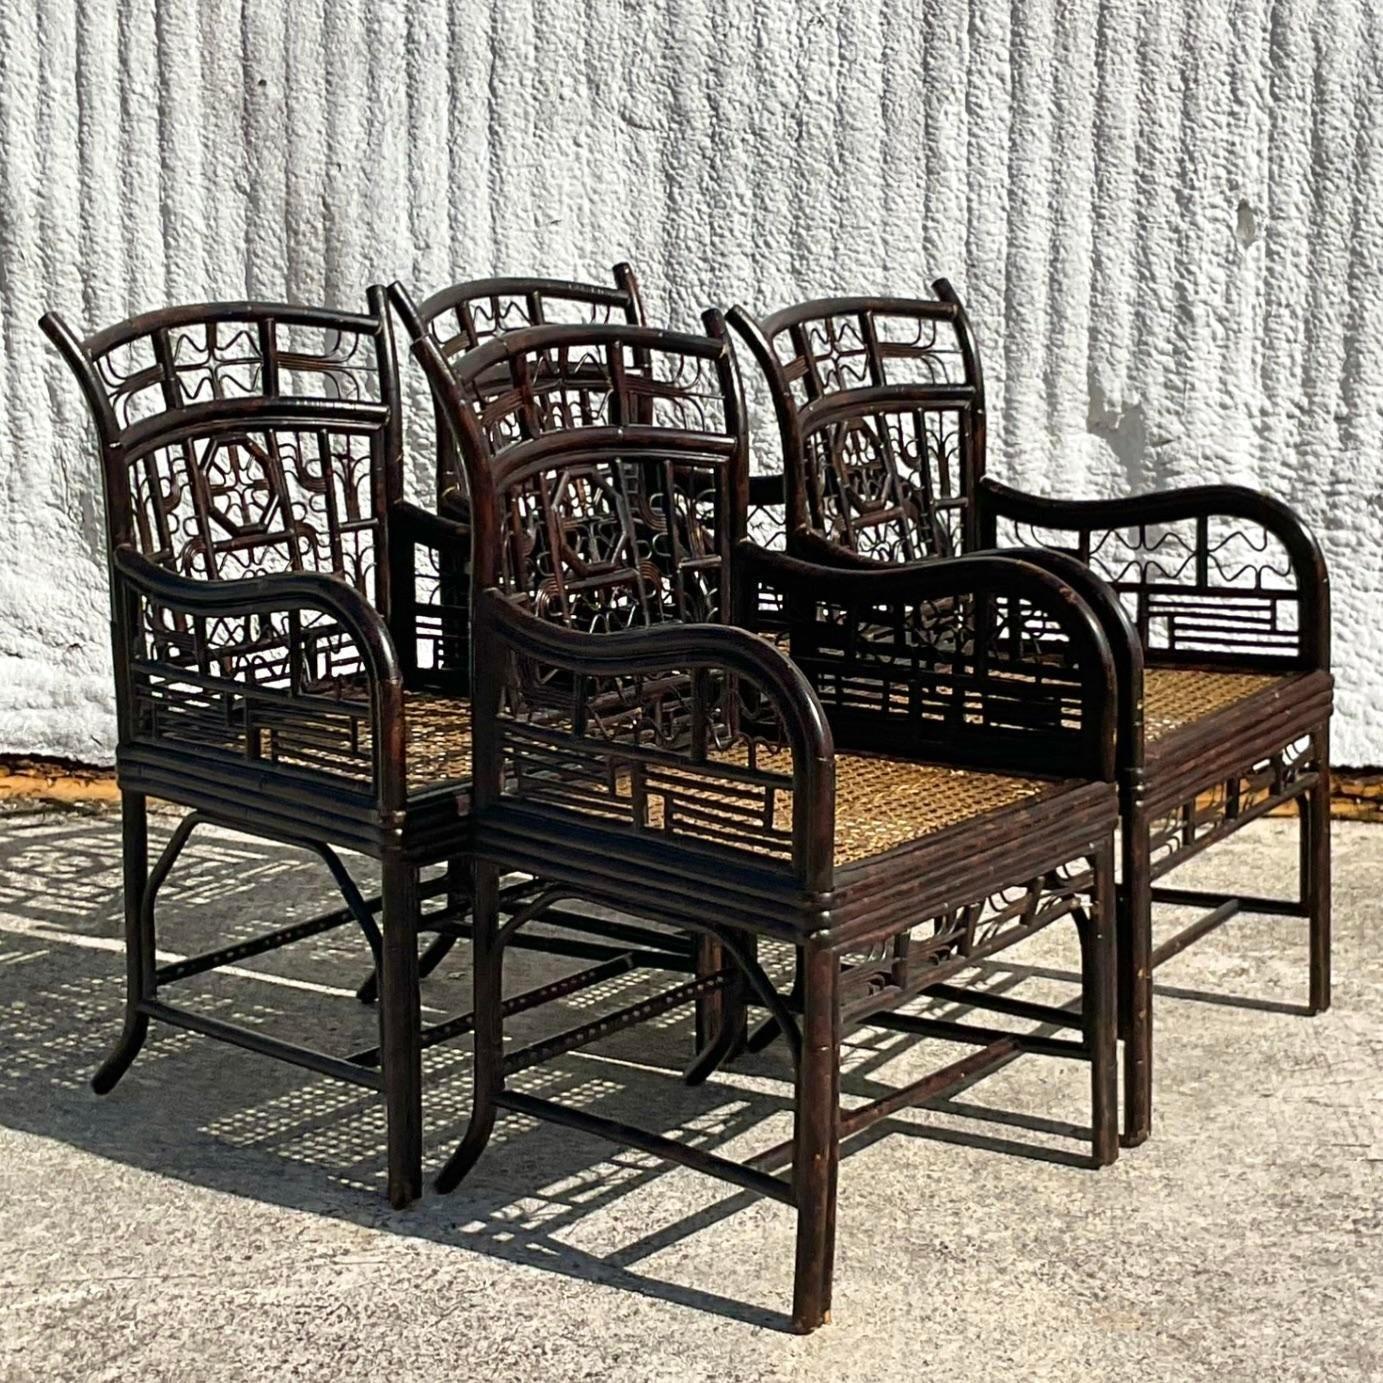 A stunning set of four vintage Coastal dining chairs. A chic ebony rattan in an updated Brighton design. Inset woven cane panel seat. Acquired from a Palm Beach estate.